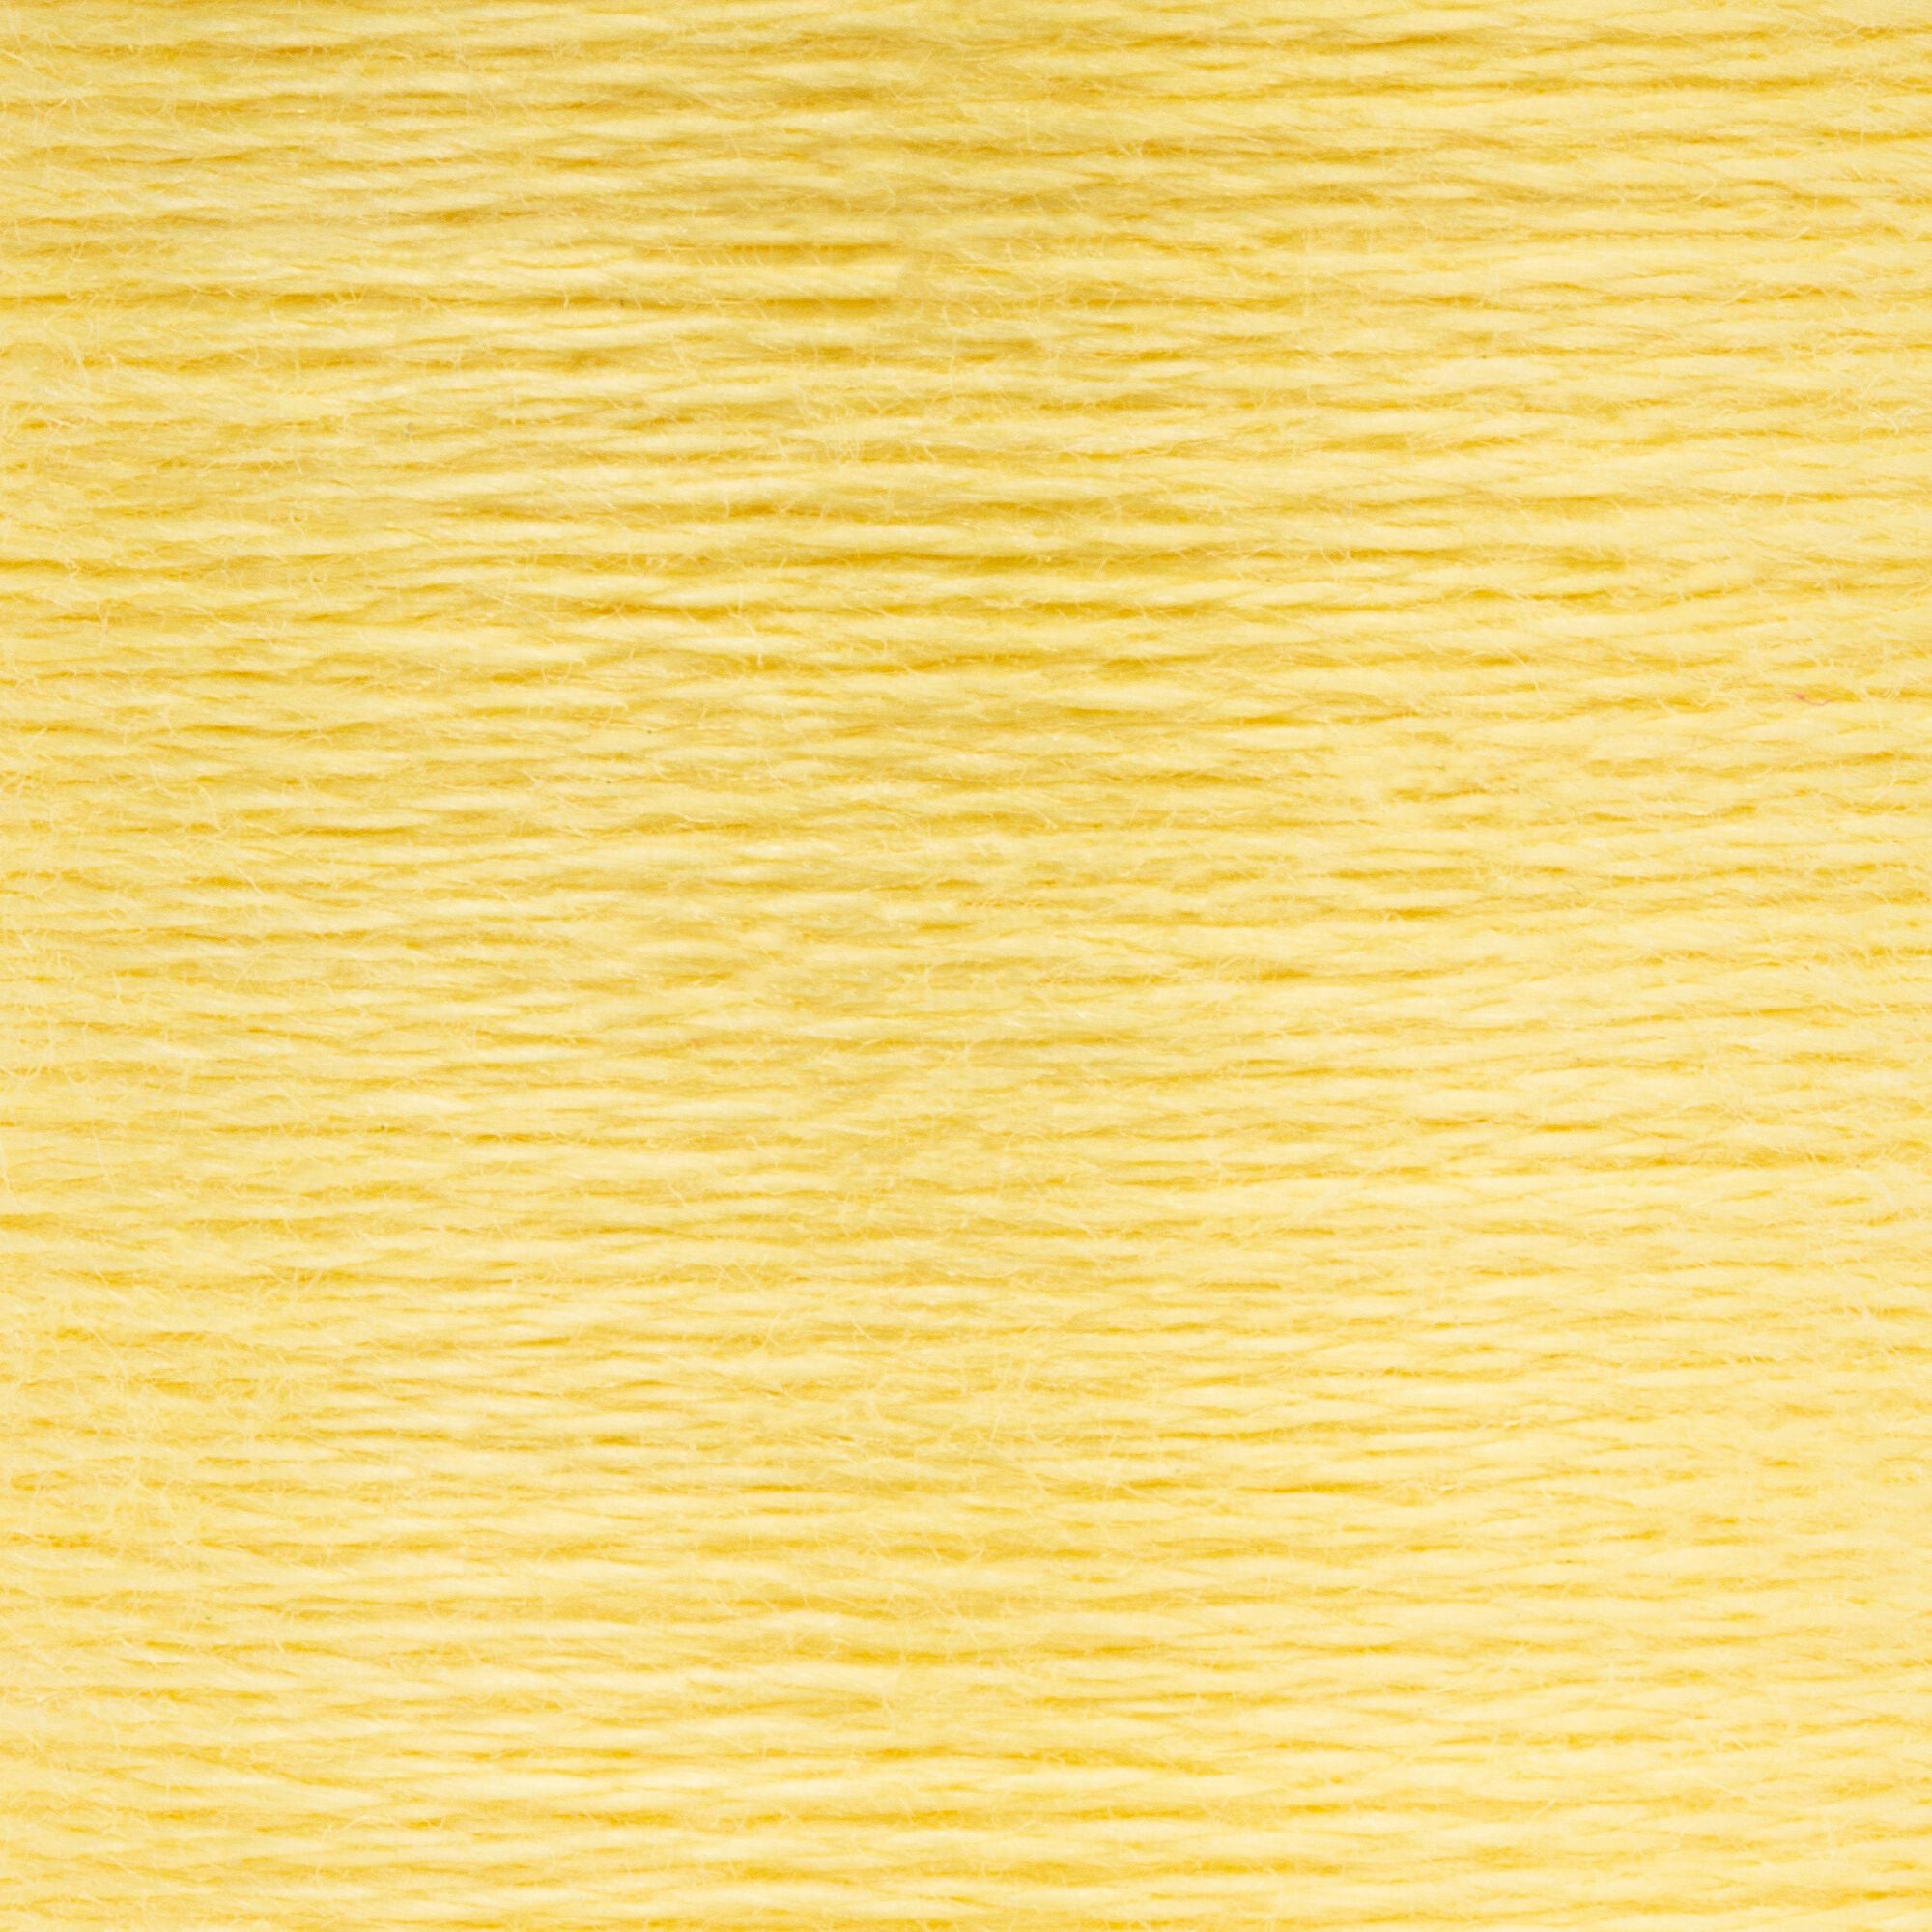 Anchor Embroidery Floss in Jonquil Lt